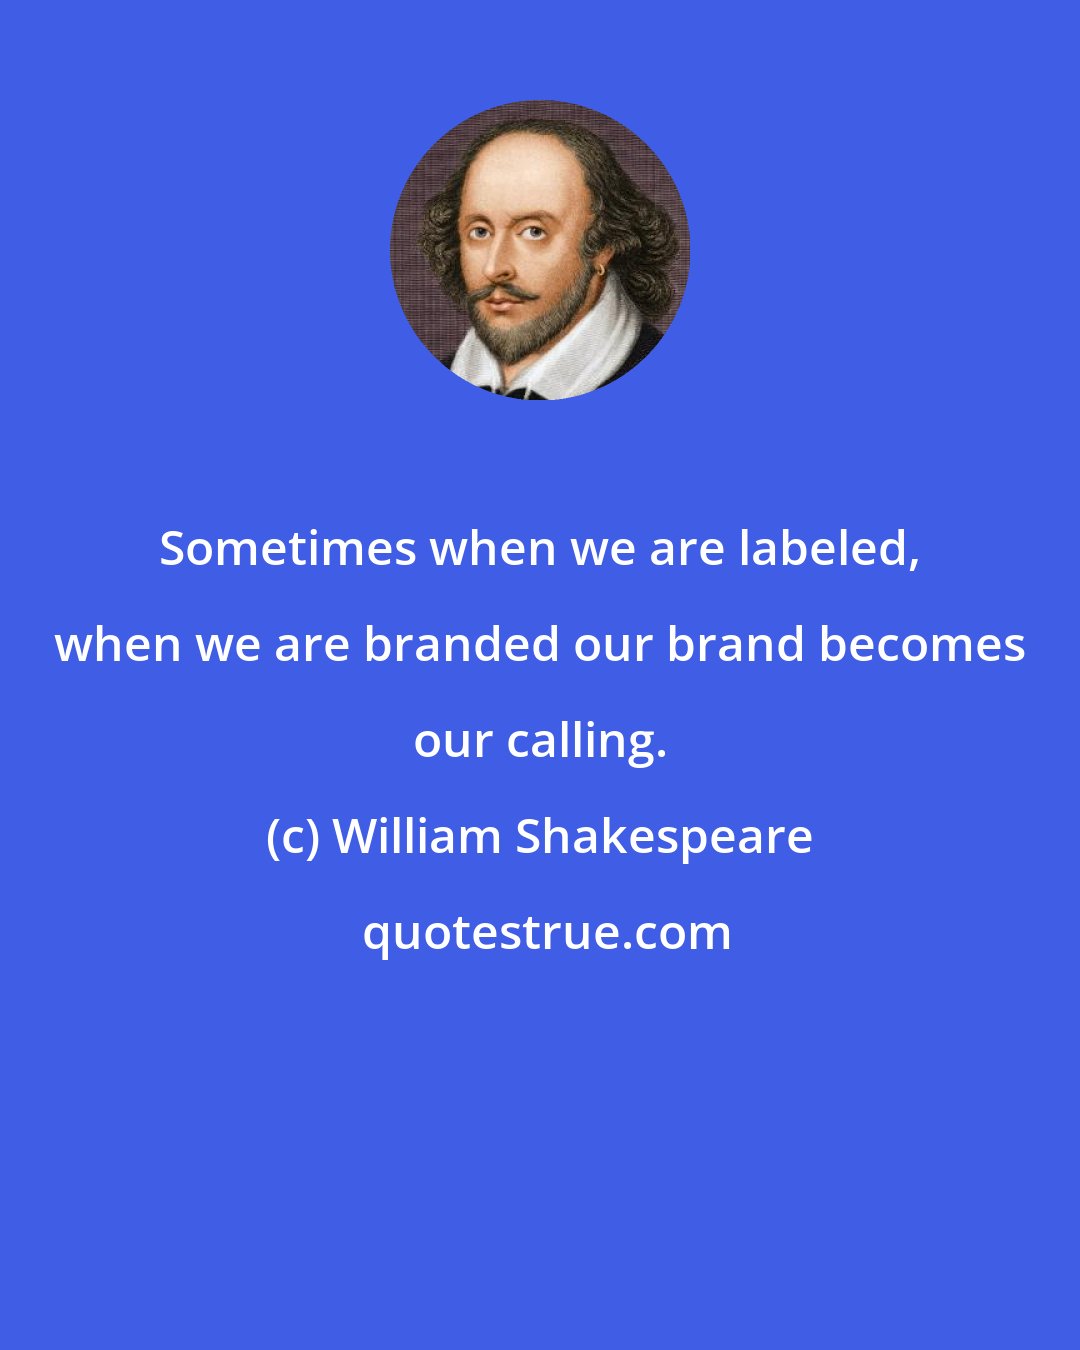 William Shakespeare: Sometimes when we are labeled, when we are branded our brand becomes our calling.